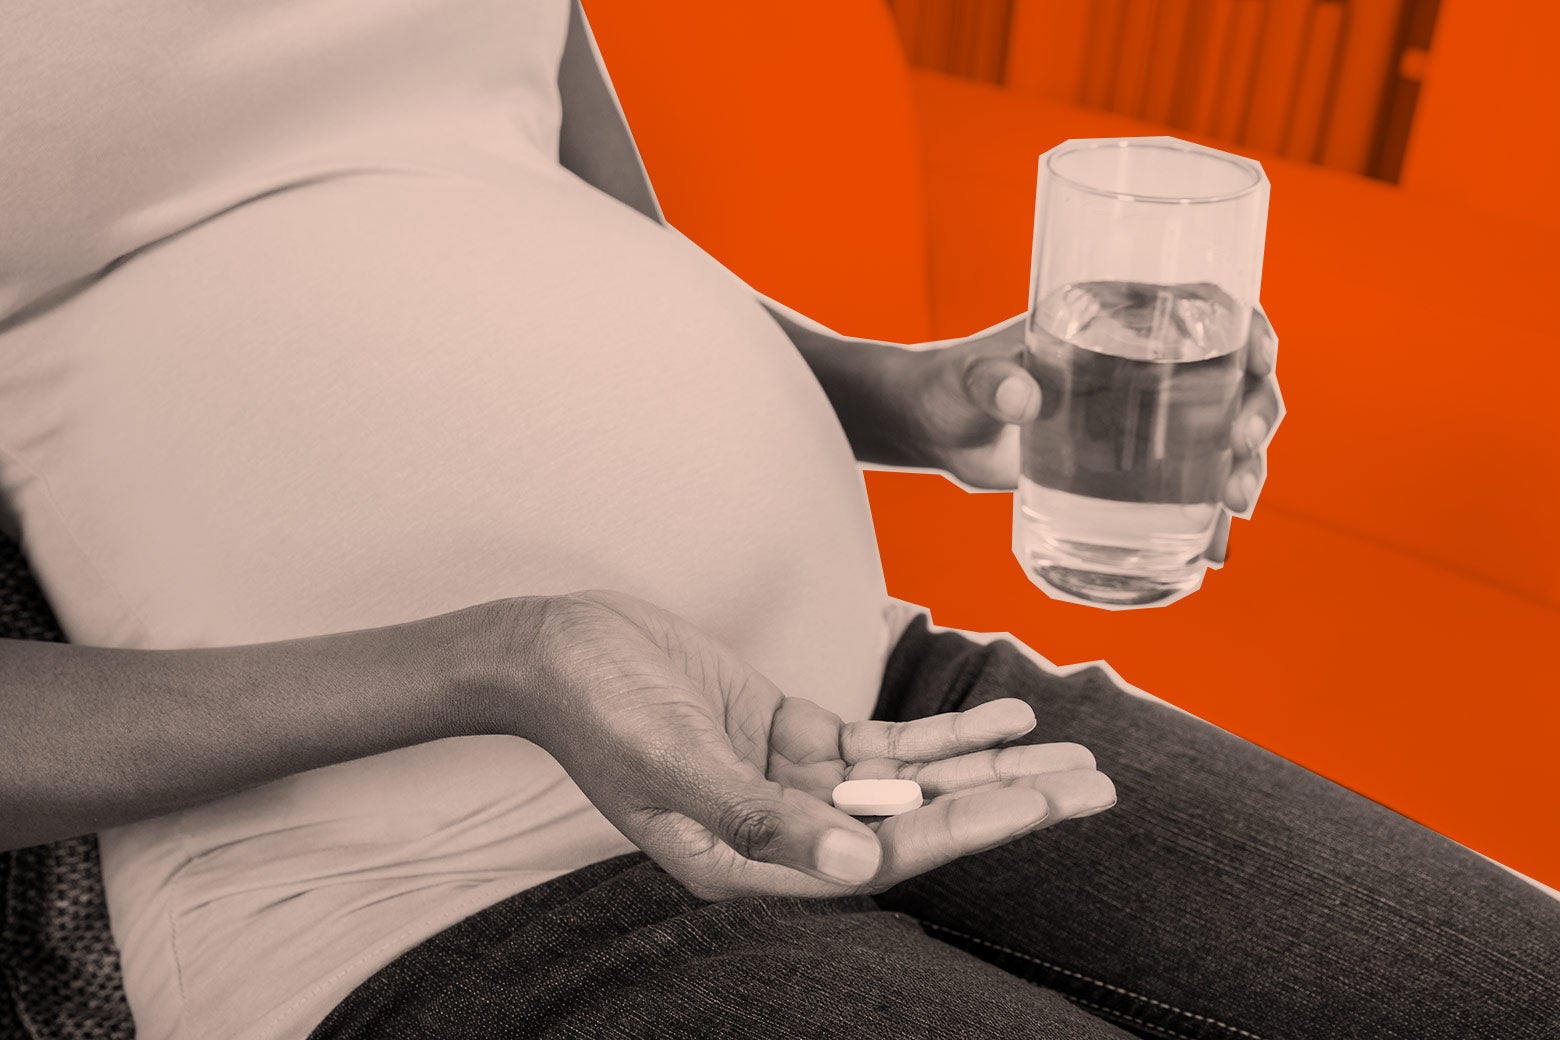 Can You Take Lorazepam While Trying To Get Pregnant